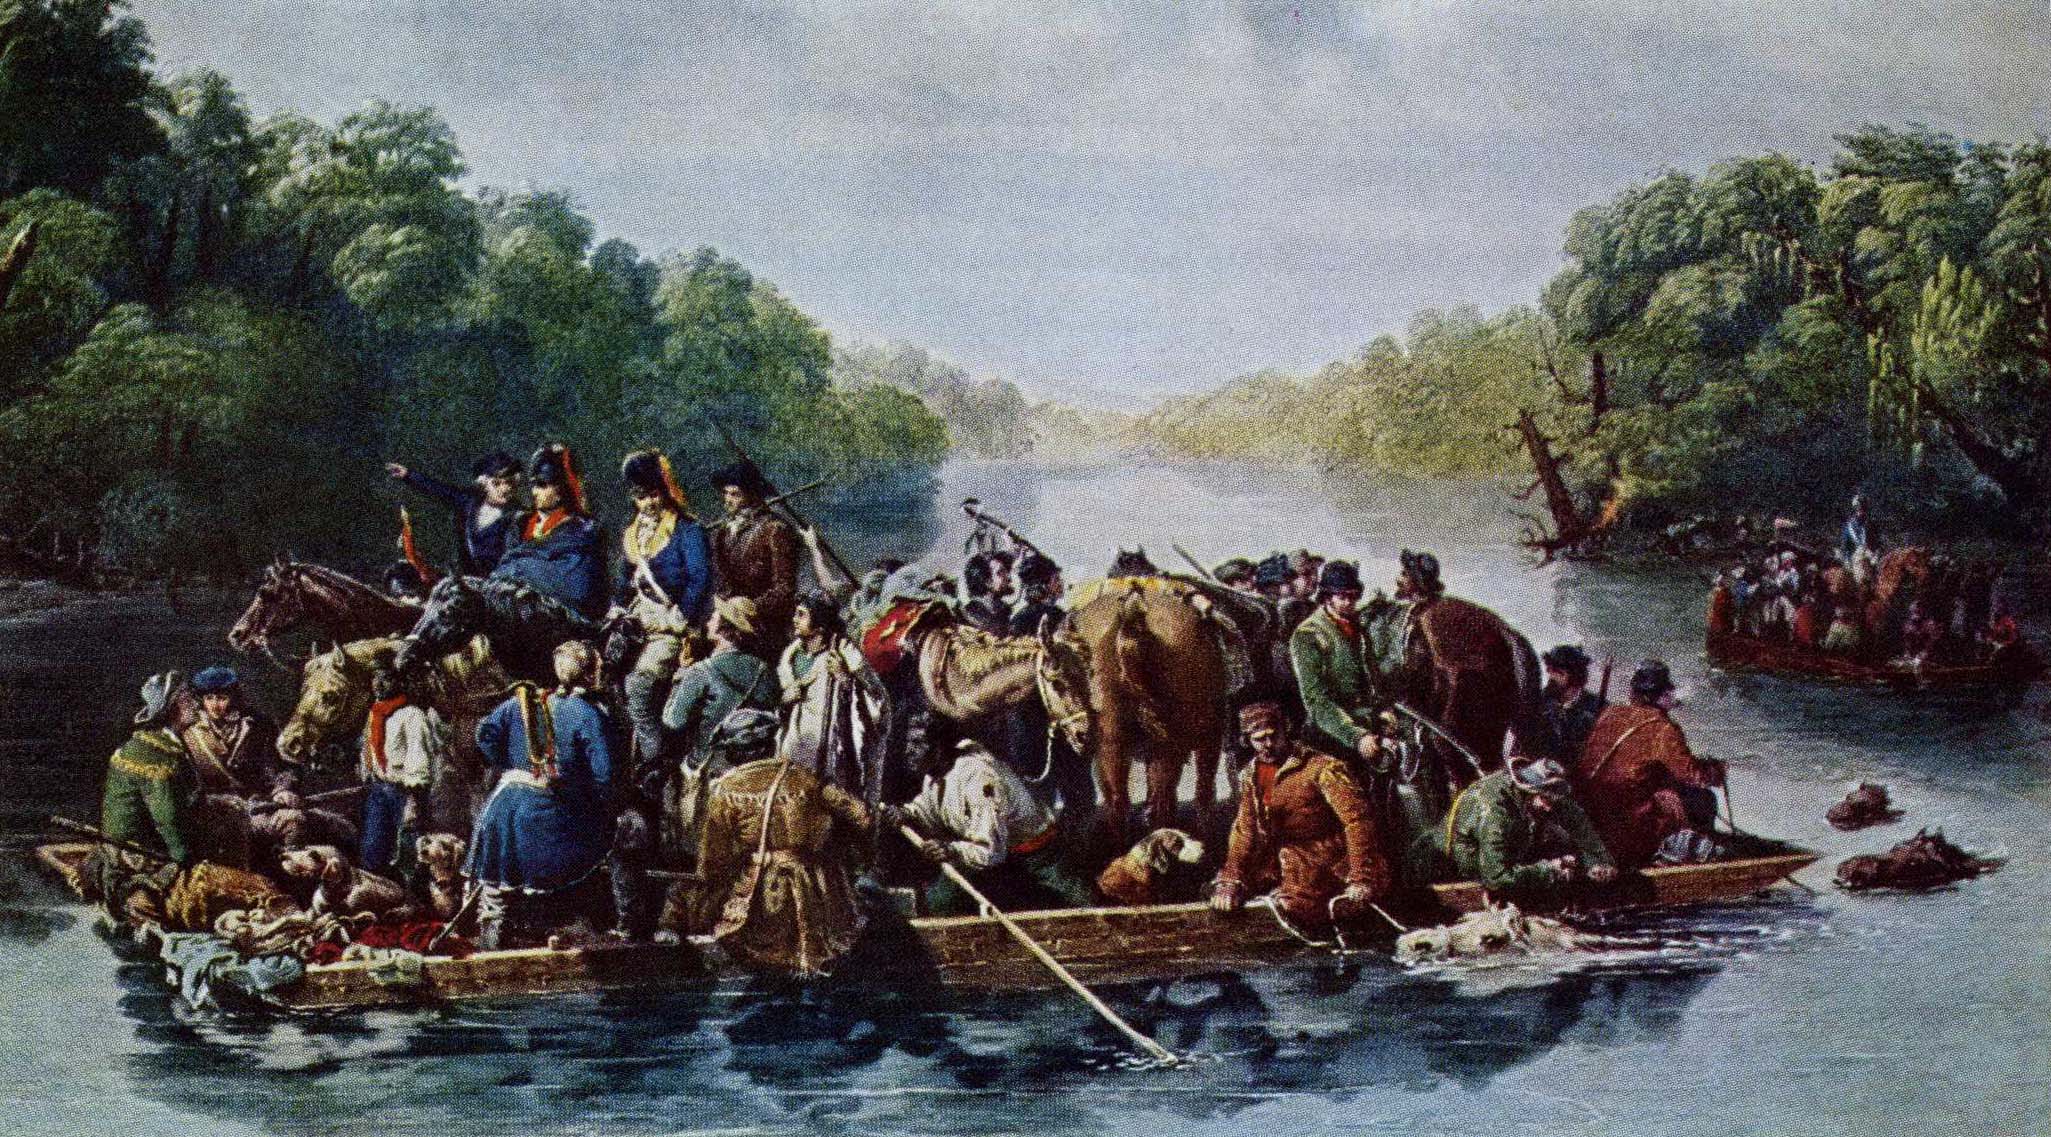 Marion (mounted, second from left) and his mean, some of them swimming their horses, cross the Pee Dee on makeshift rafts. Few of his soldiers wore uniforms, and regular troops often laughed at their appearance. Painting courtesy of Life (The Collection of Preston Davie)